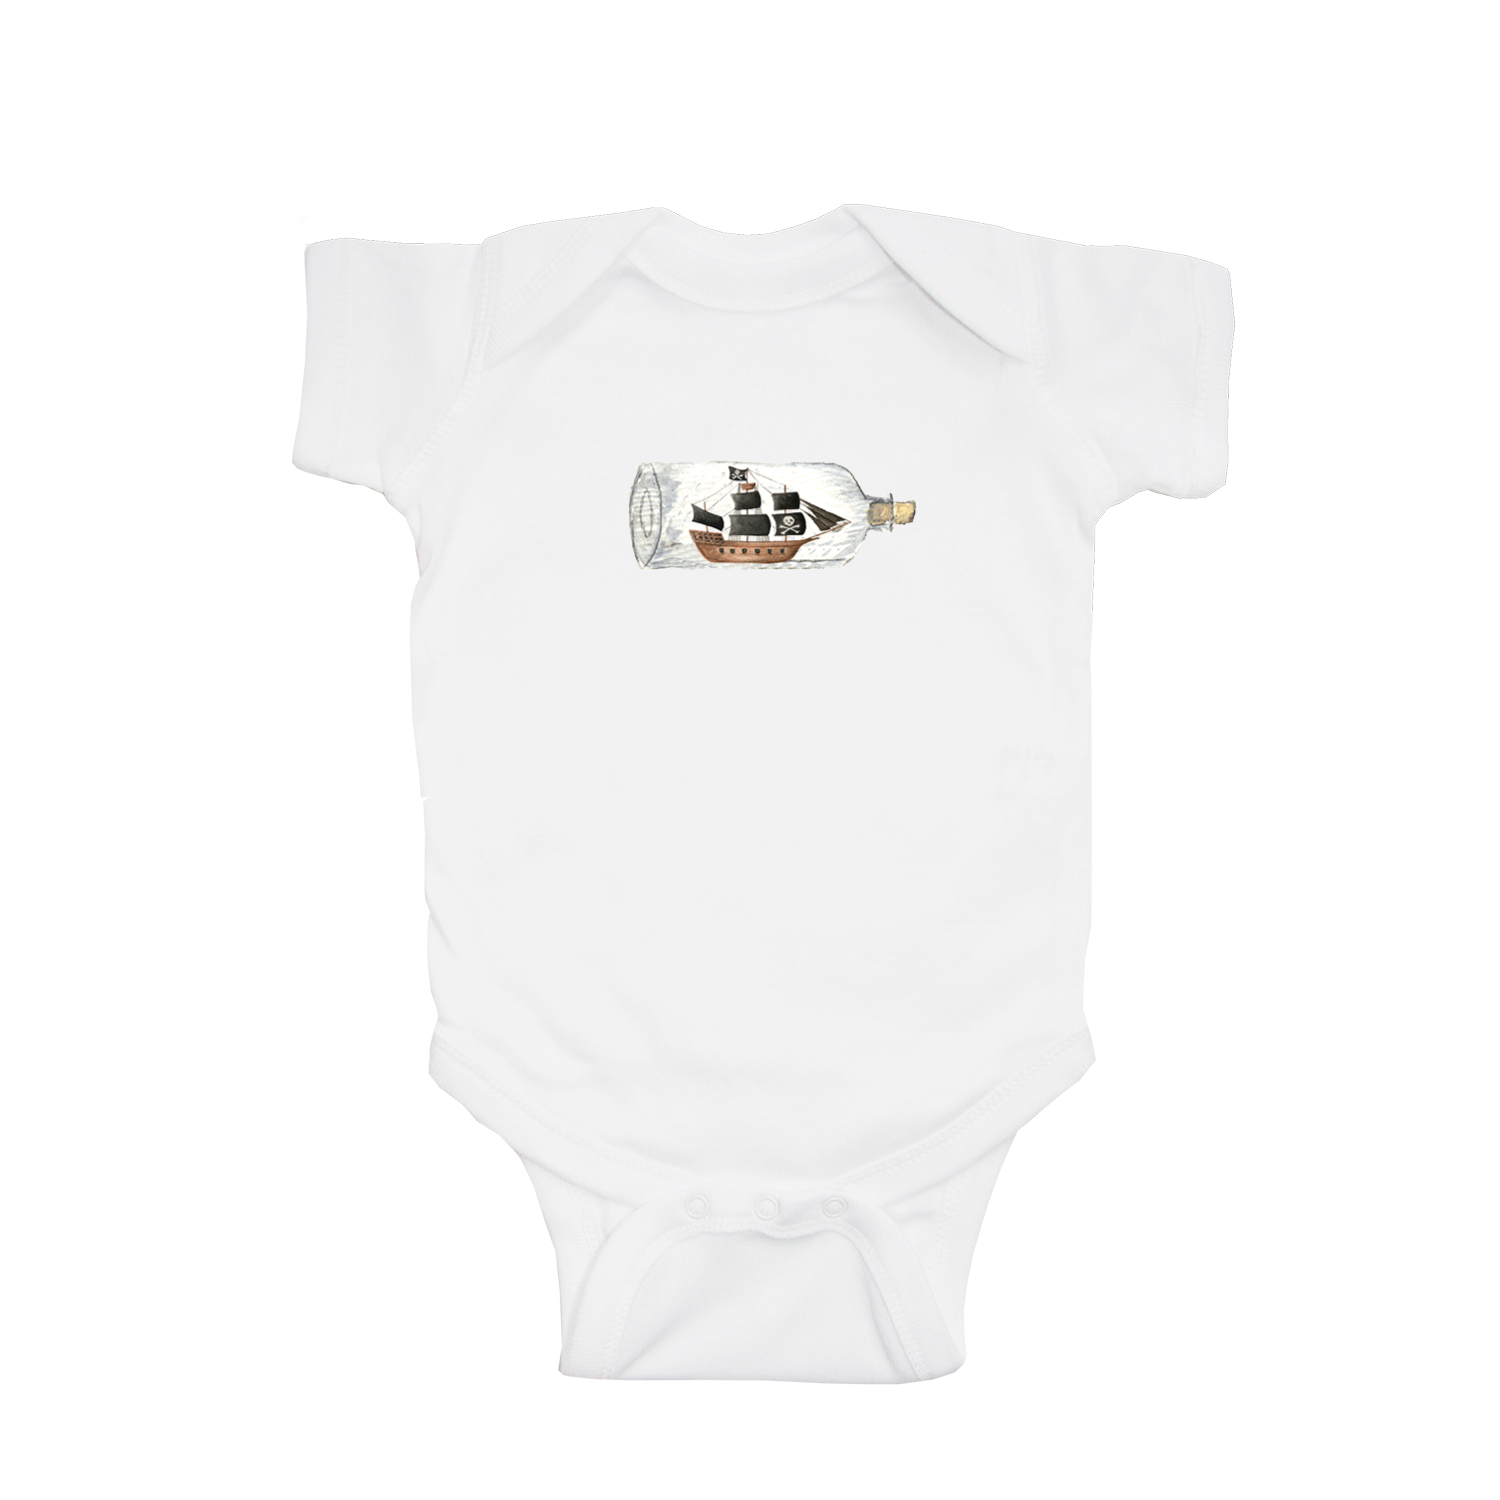 pirate ship in a bottle baby snap up short sleeve